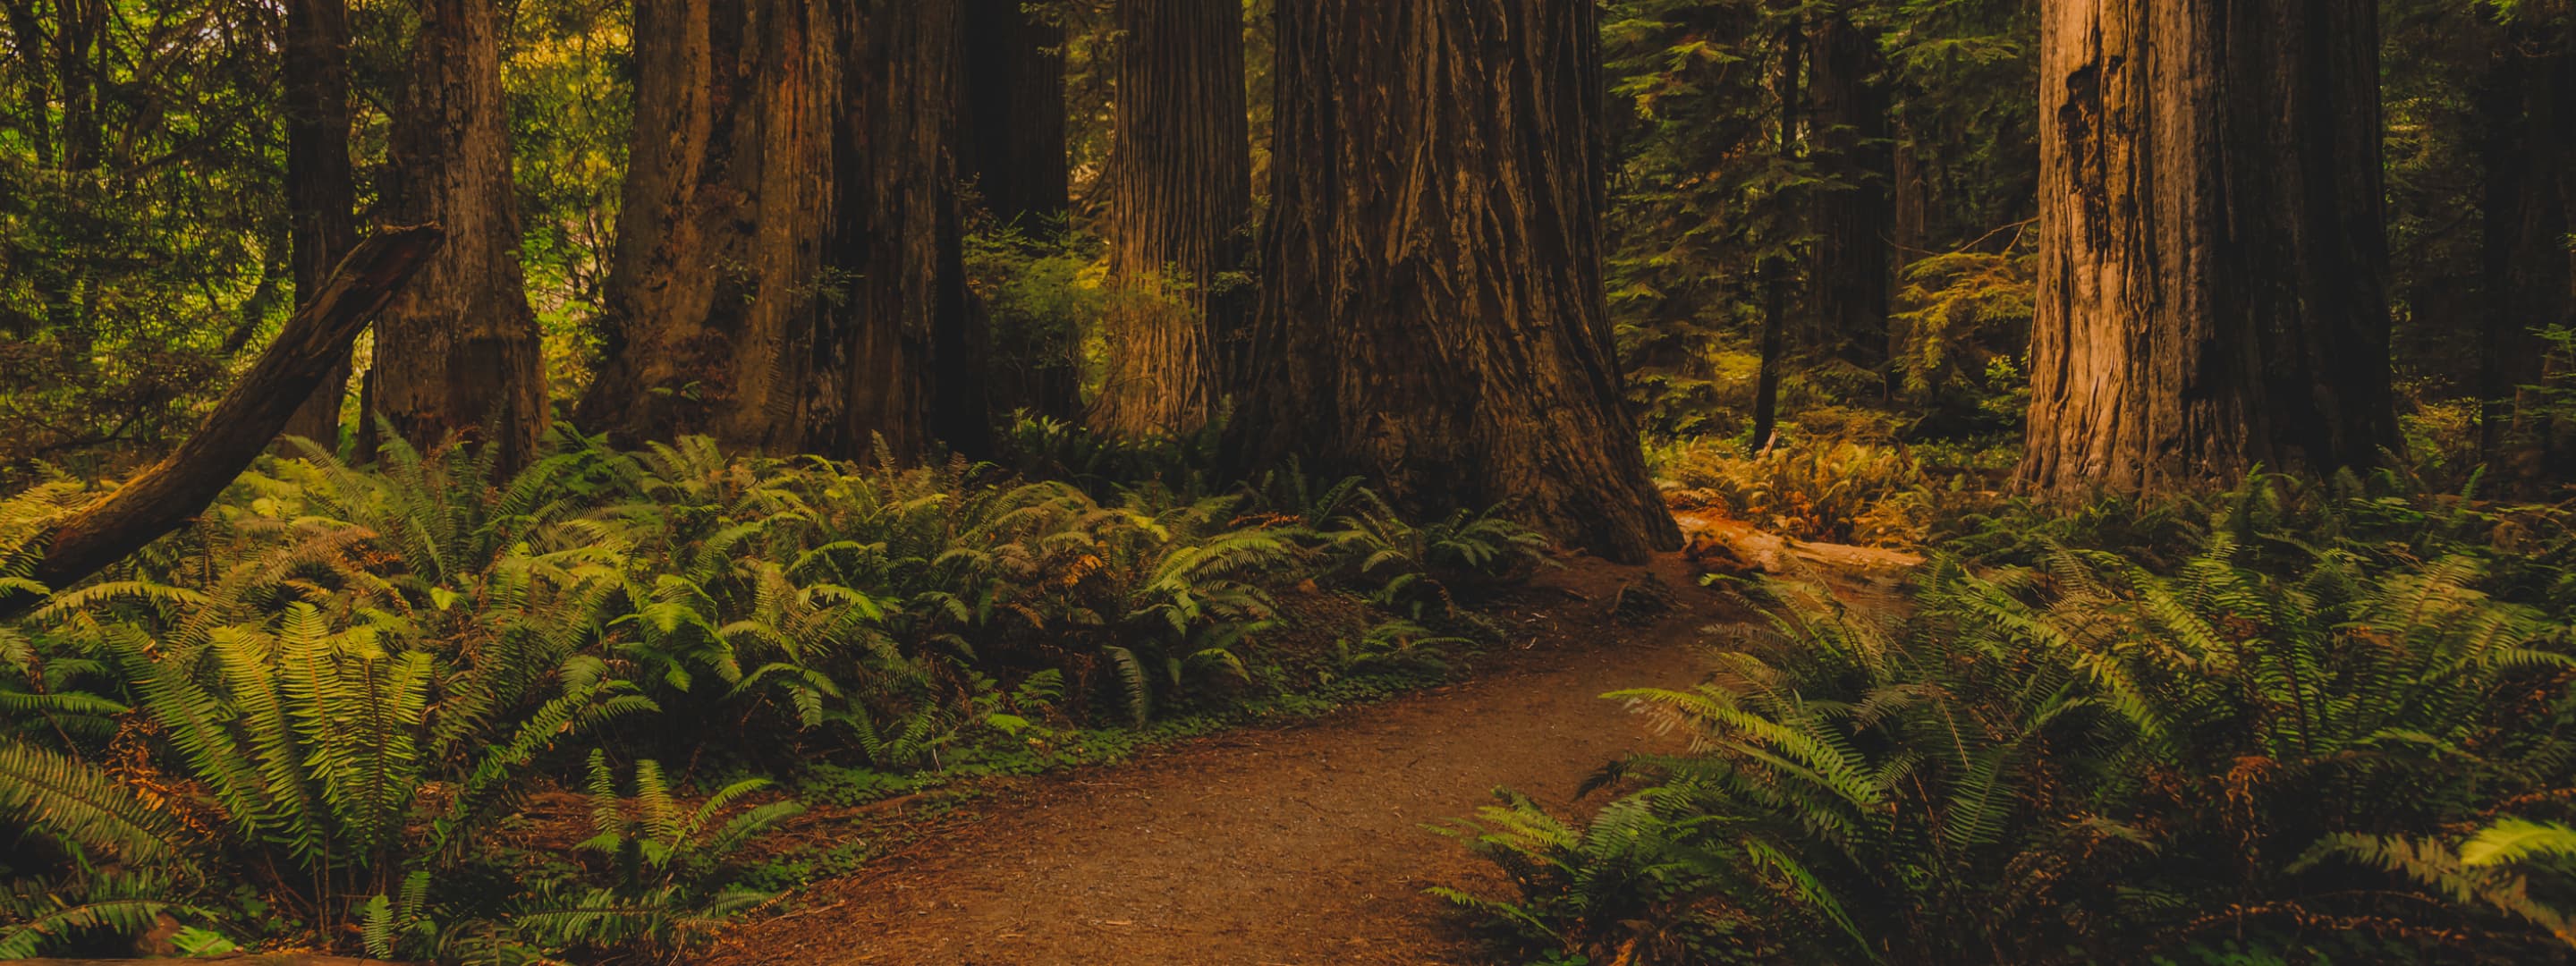 Lush ferns and towering redwood trees surround a wide, inviting trail.